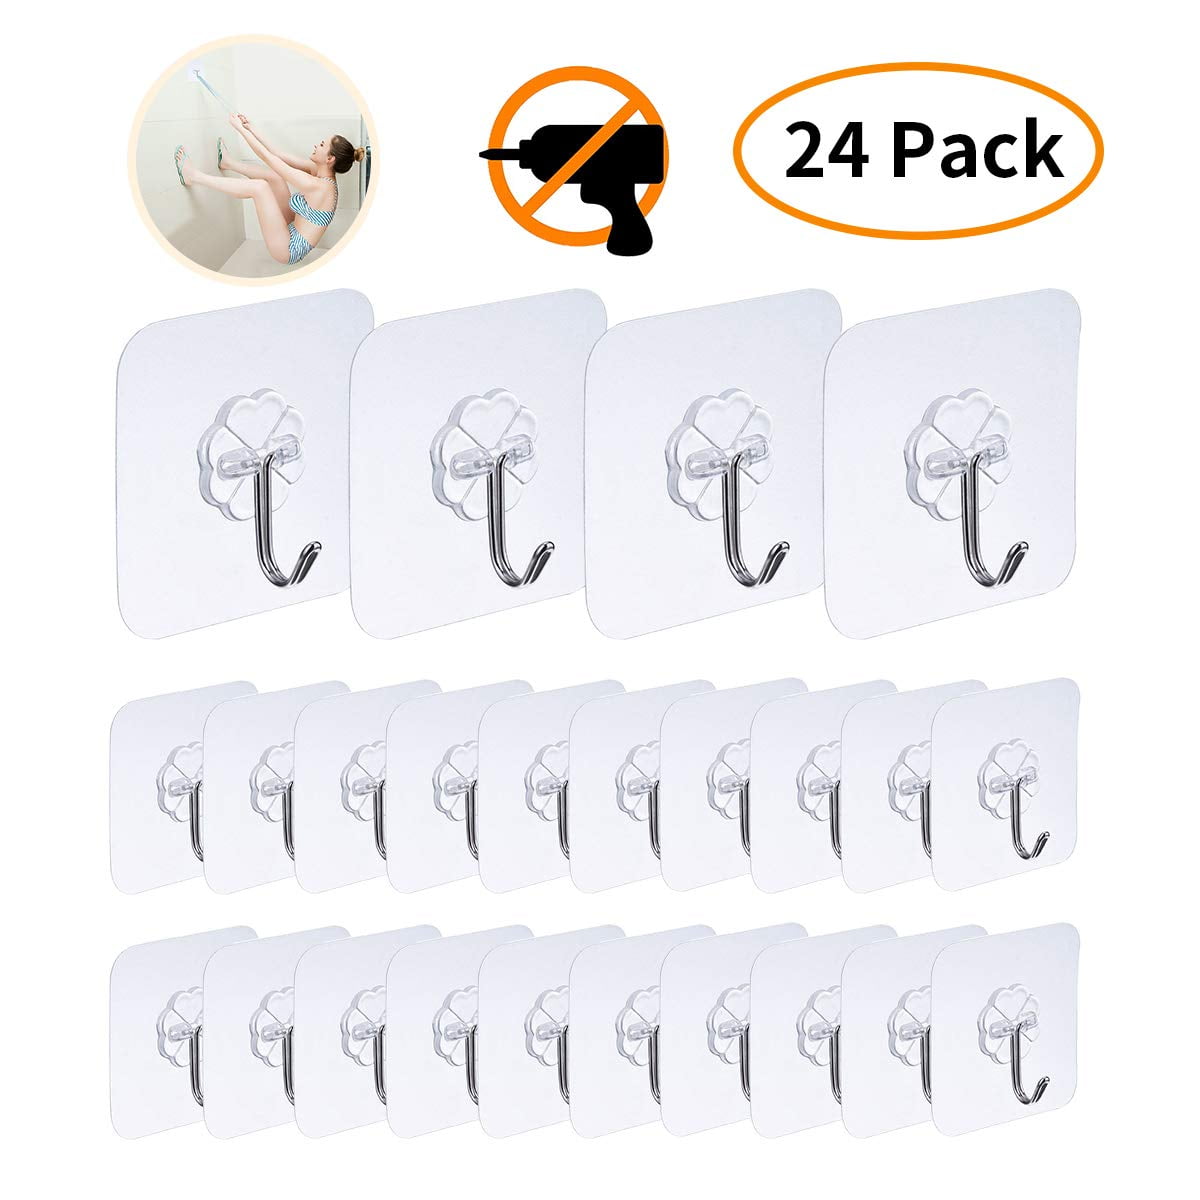 30/20/10 PACK Adhesive Sticky Hooks Heavy Duty Wall Seamless Hangers Transparent 